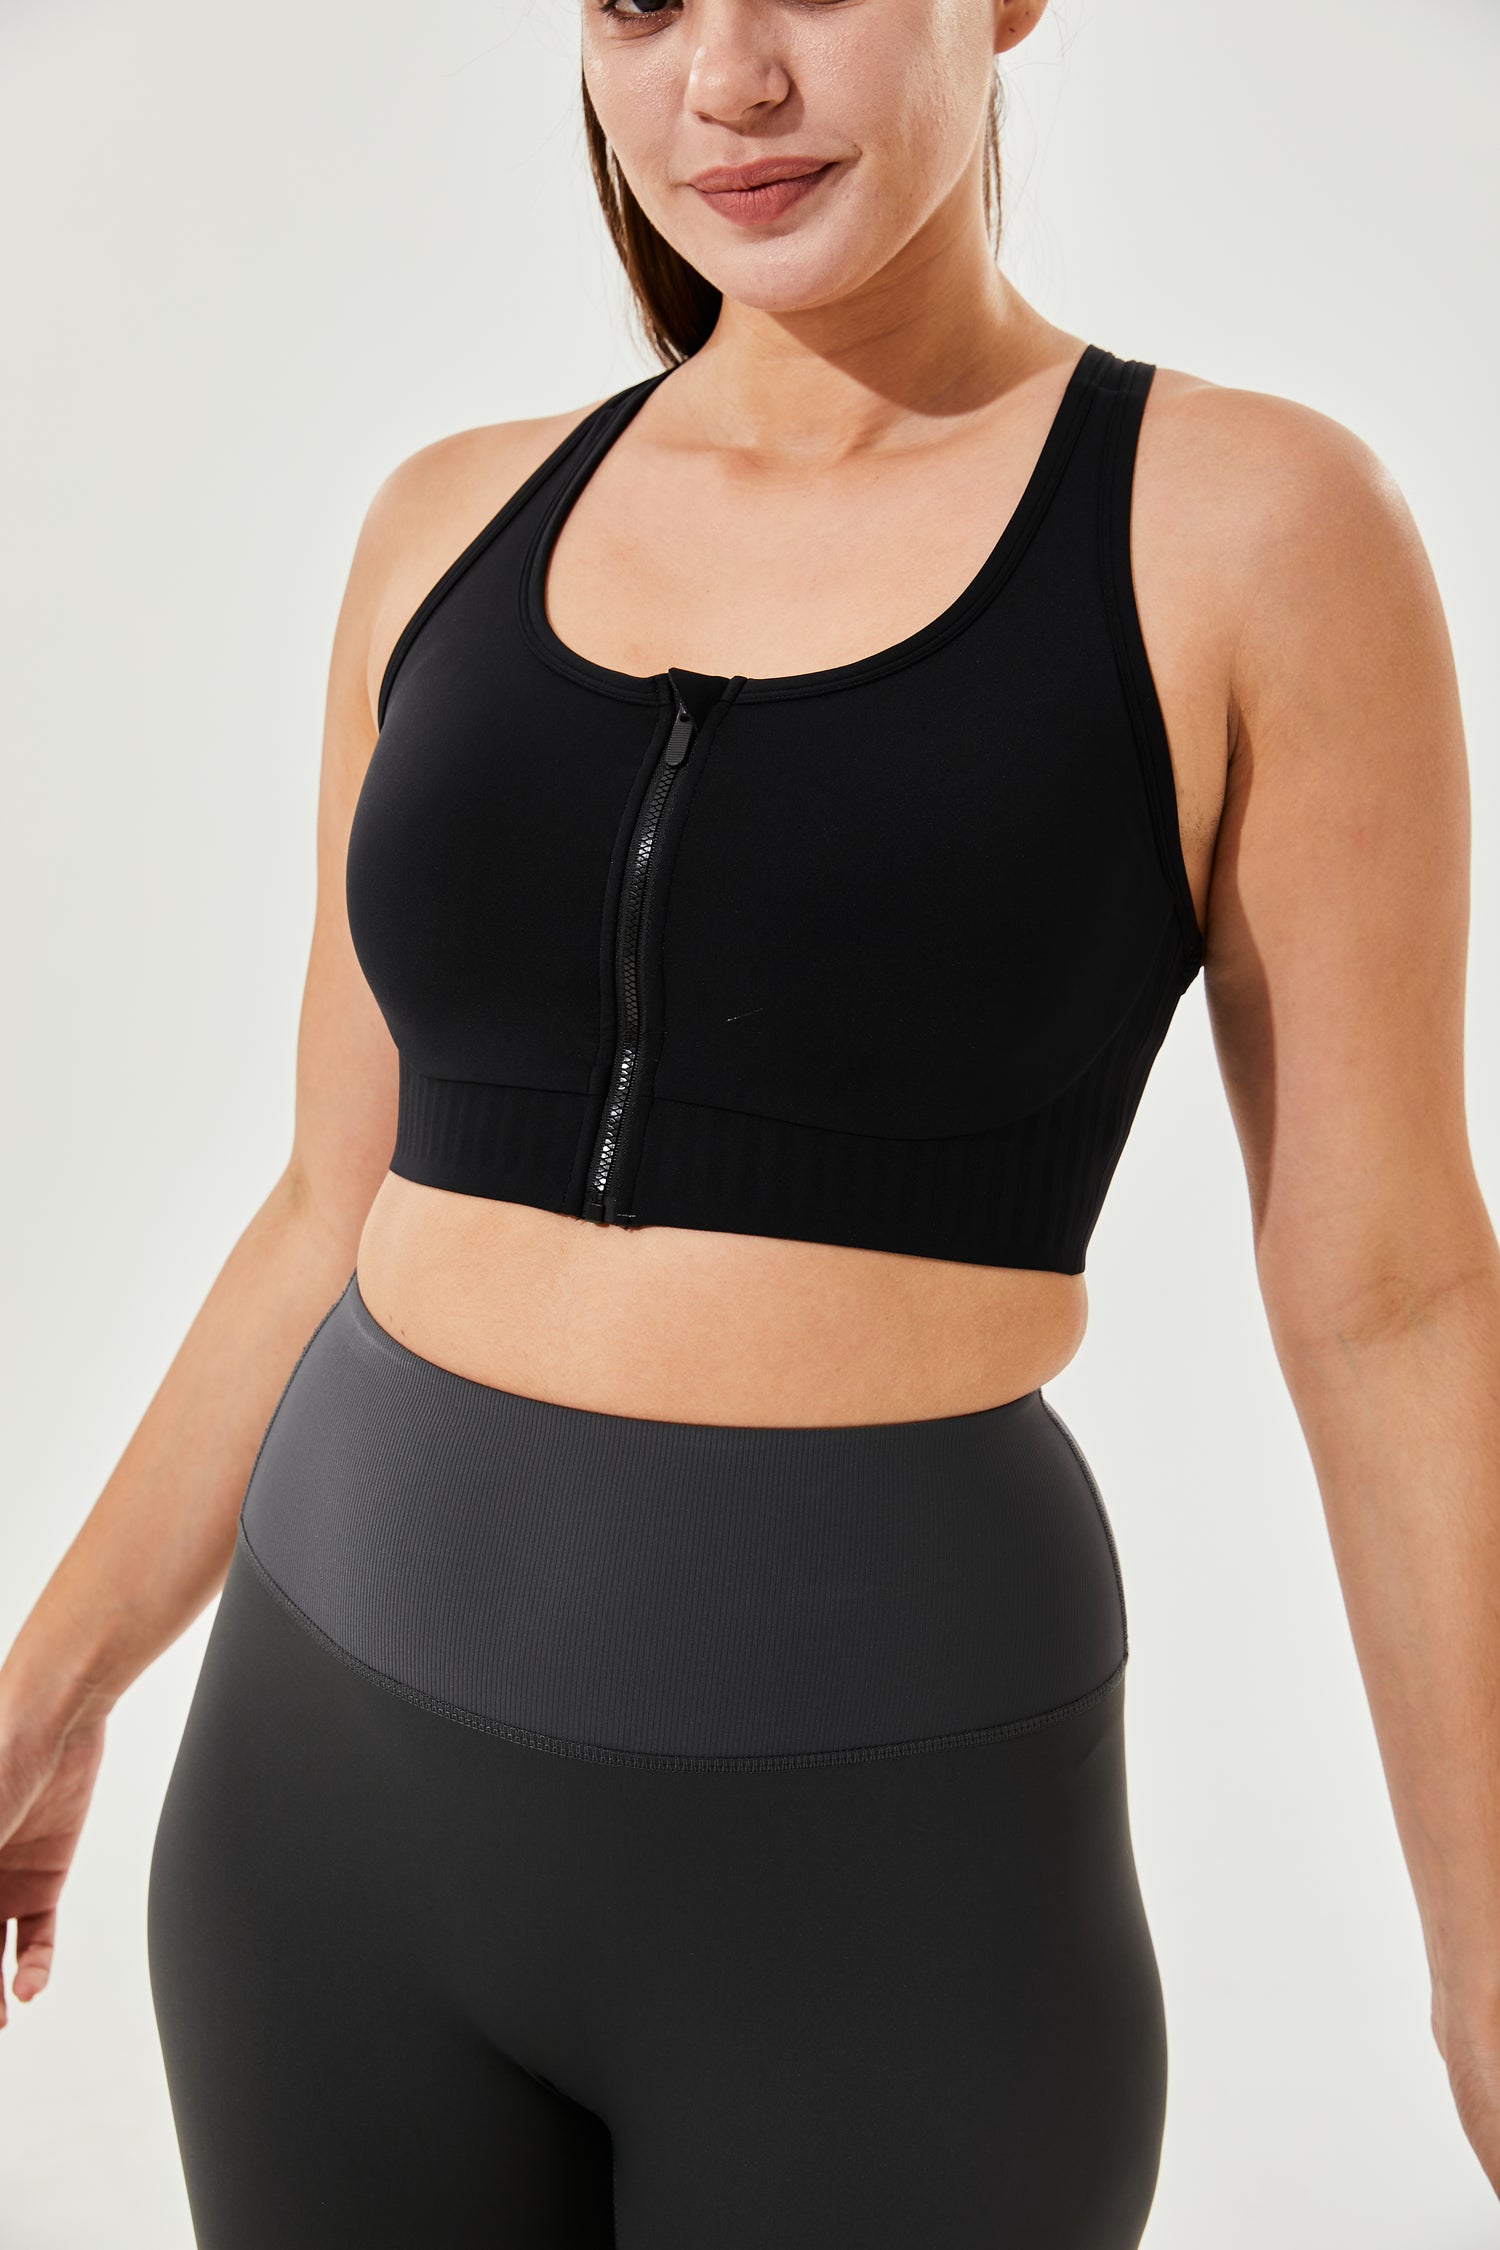 Sports bra with zip & moulded cups Singapore, Australia